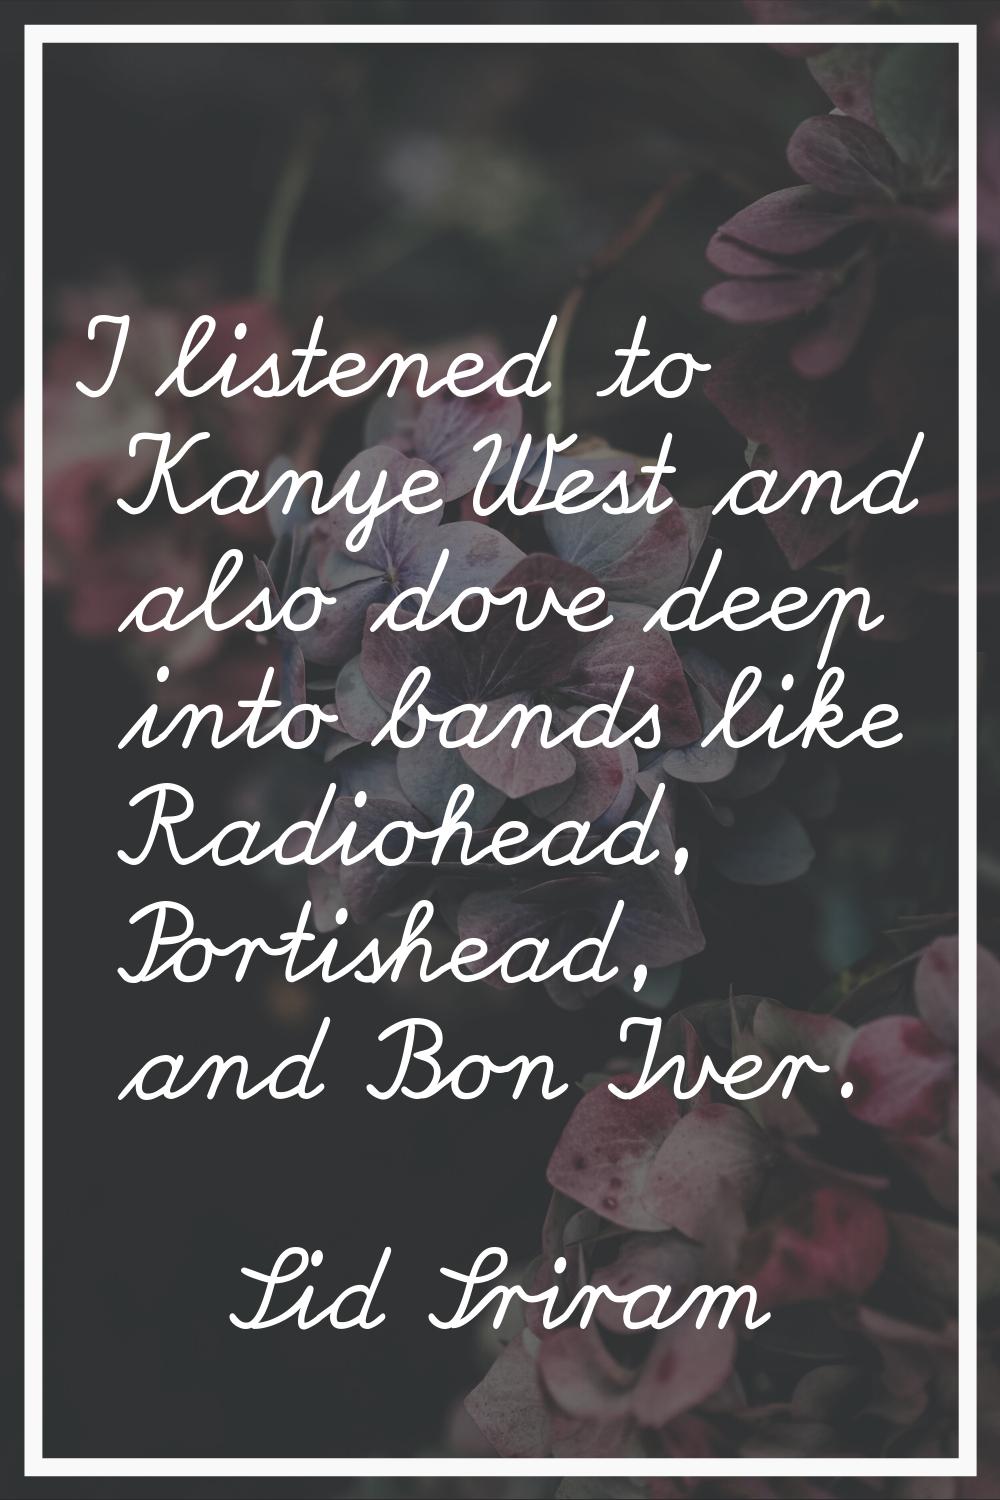 I listened to Kanye West and also dove deep into bands like Radiohead, Portishead, and Bon Iver.